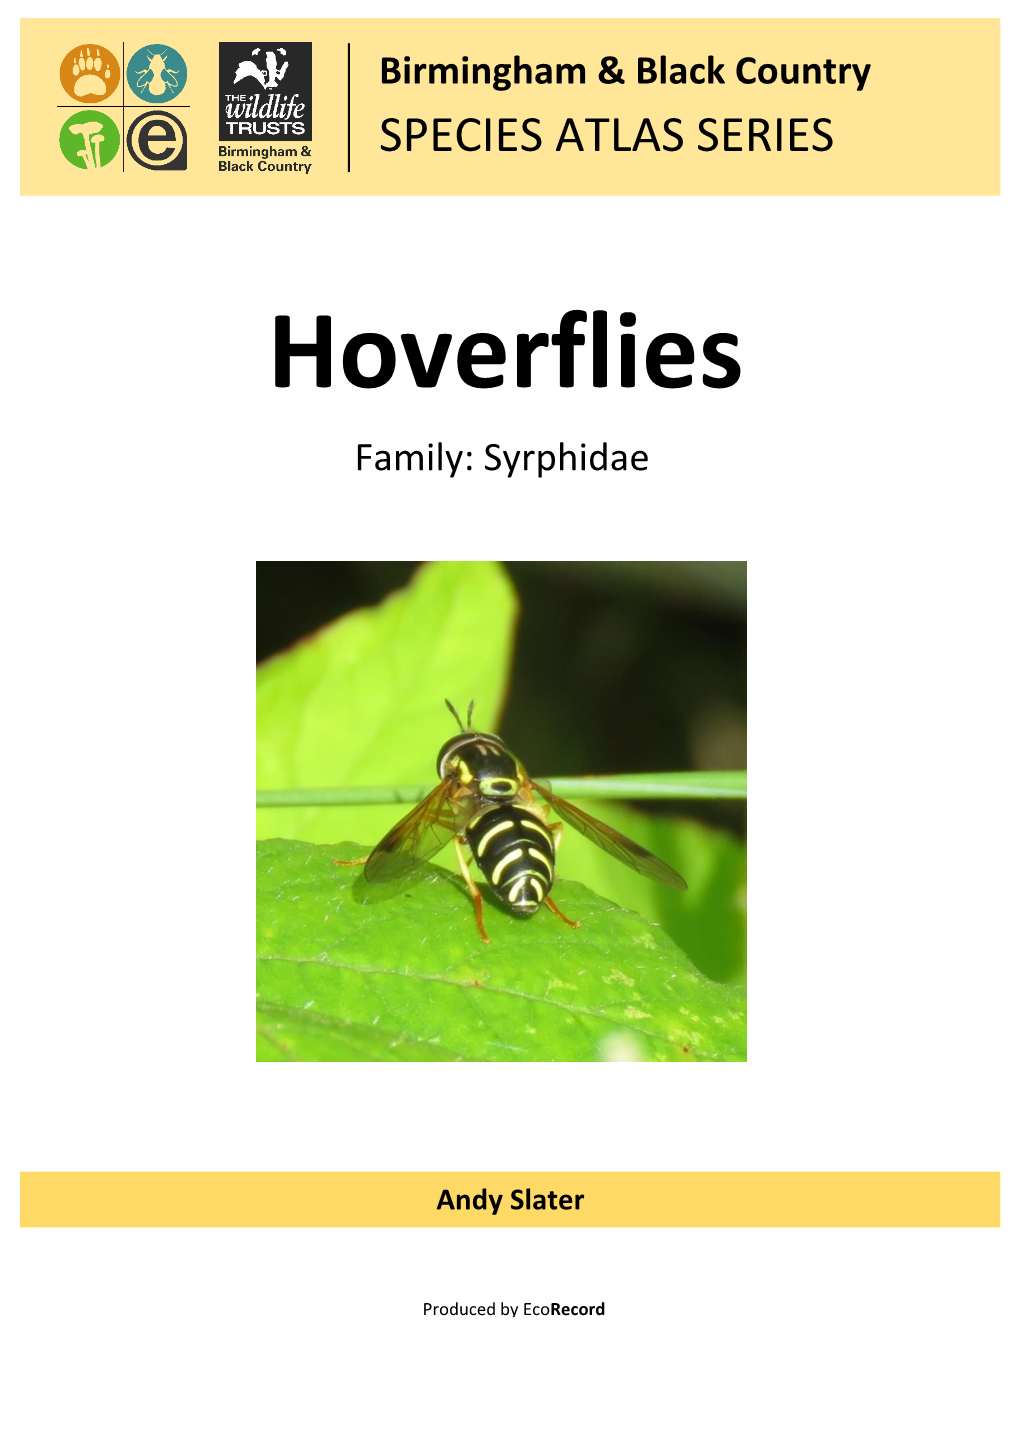 Hoverflies Family: Syrphidae